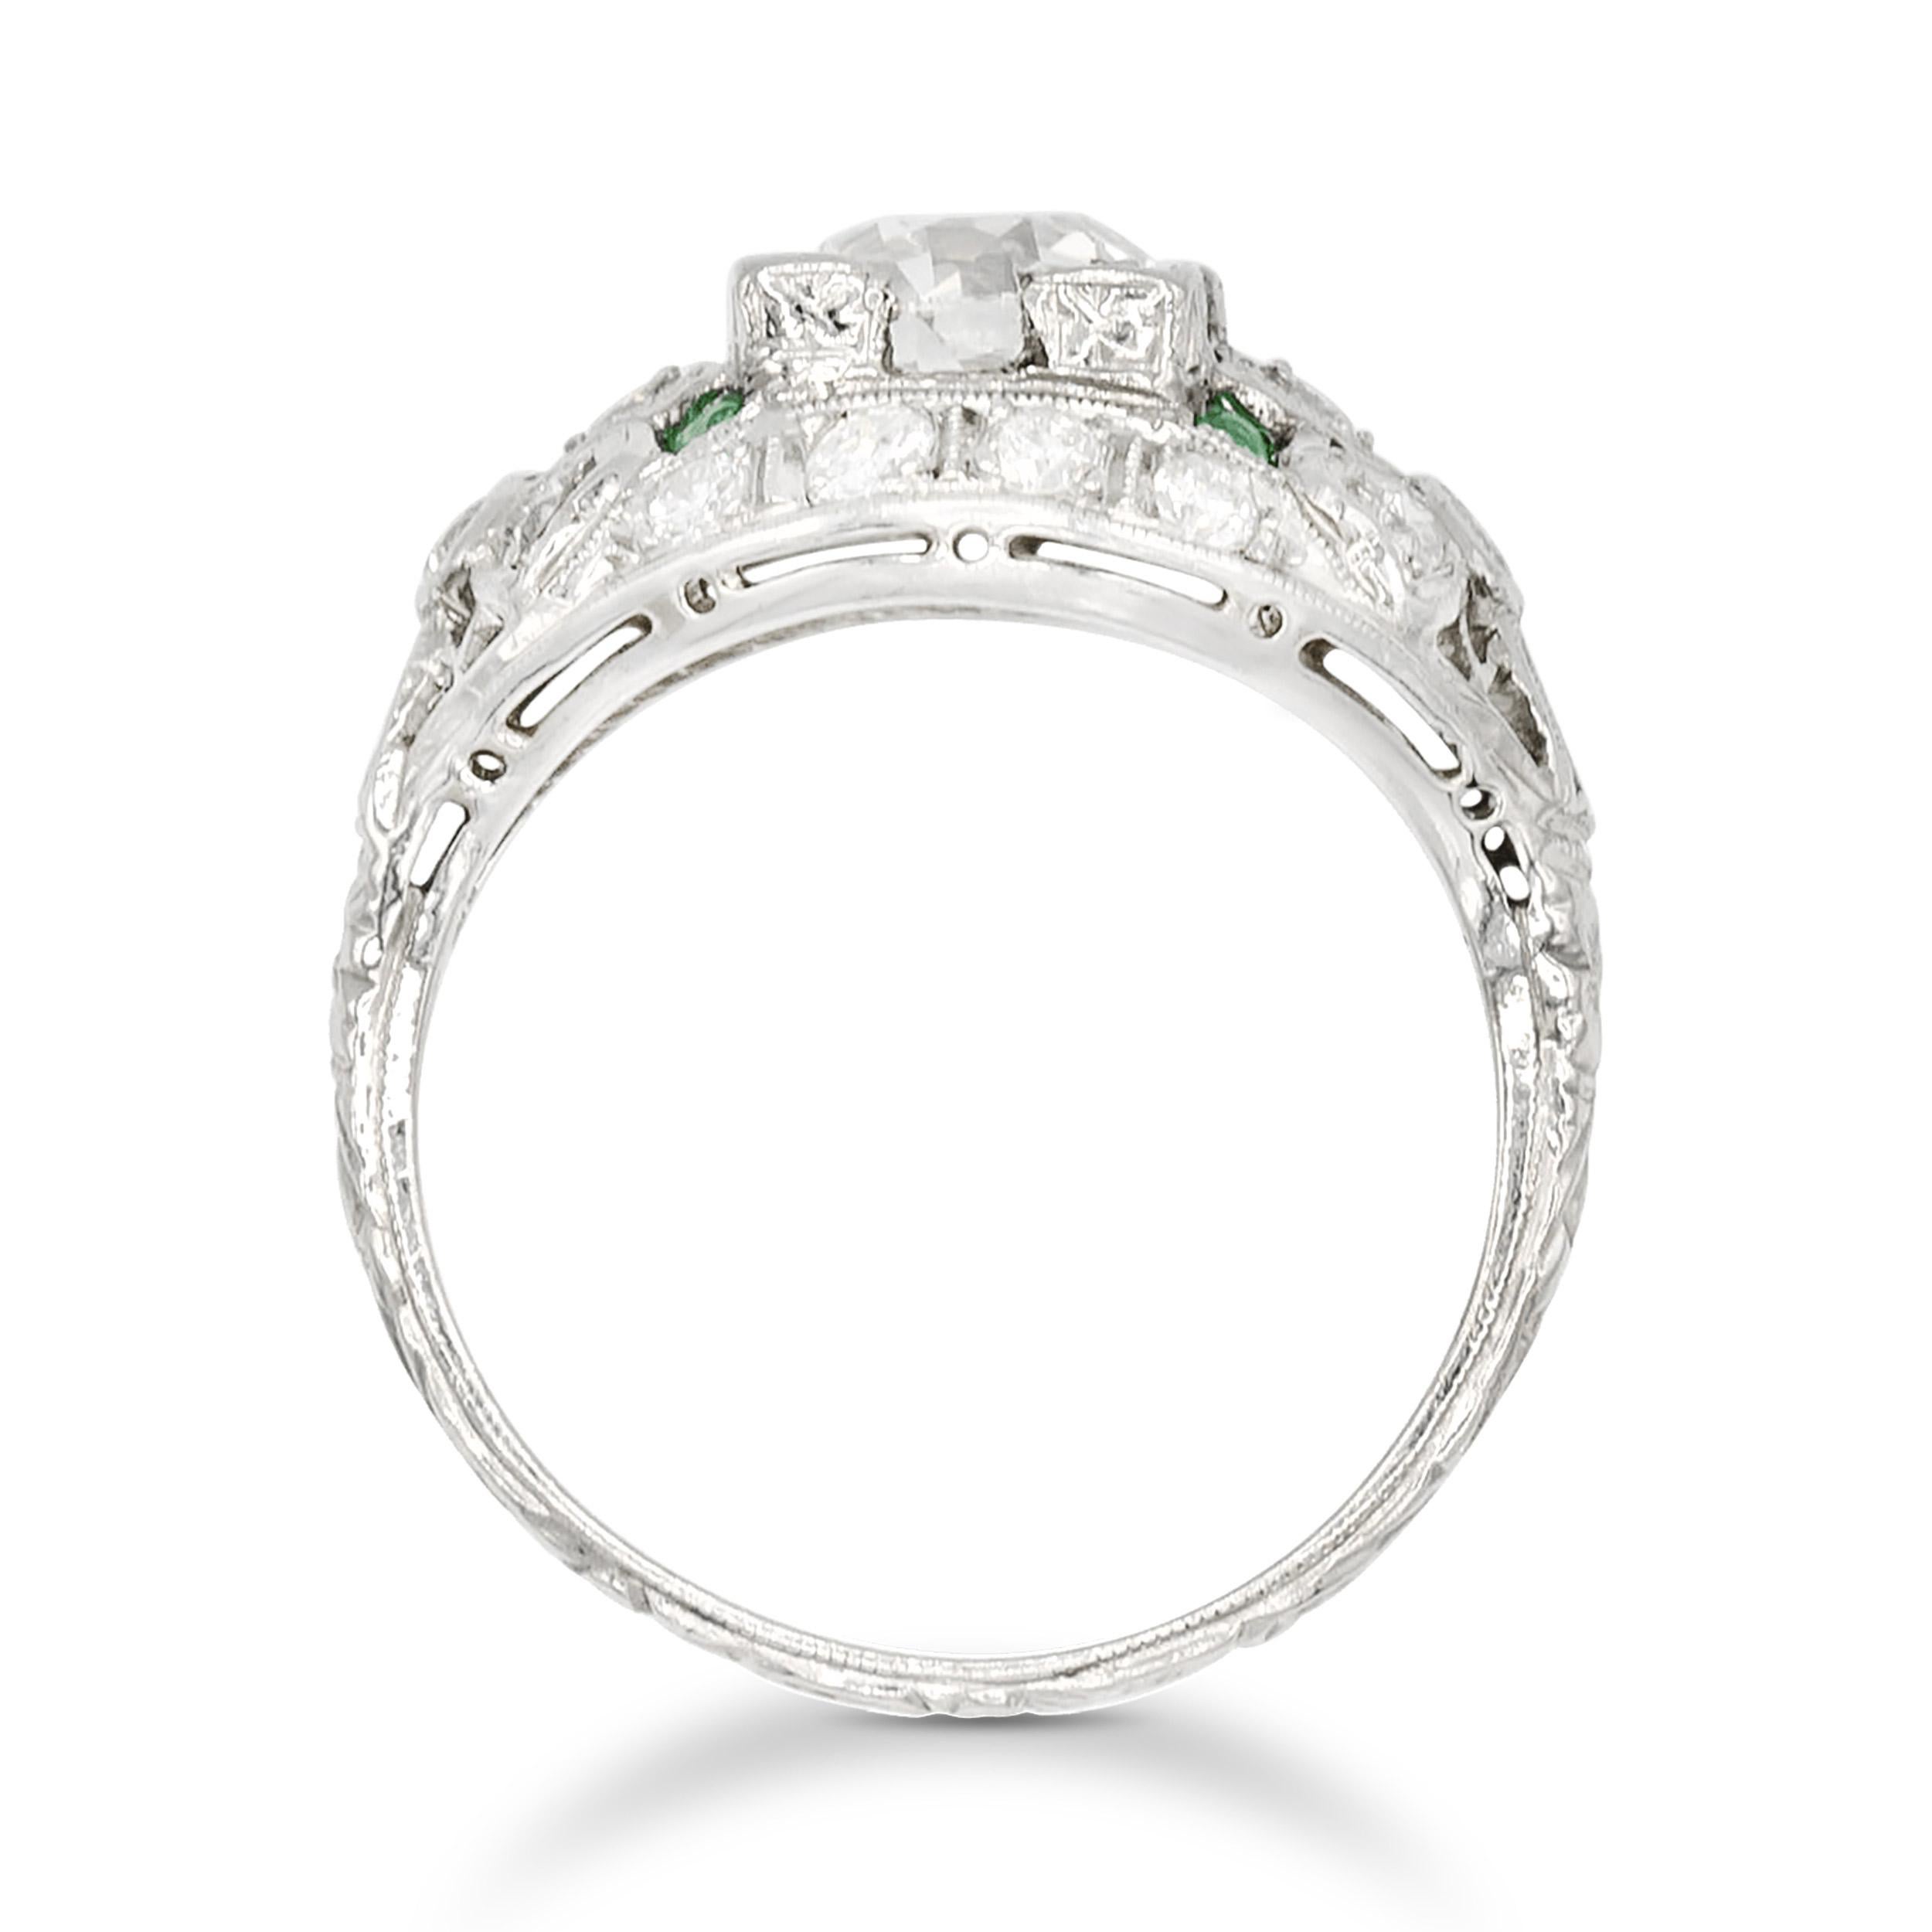 Old European Cut Art Deco 1.49 Ct. Diamond and Emerald Engagement Ring GIA J SI2, Platinum For Sale